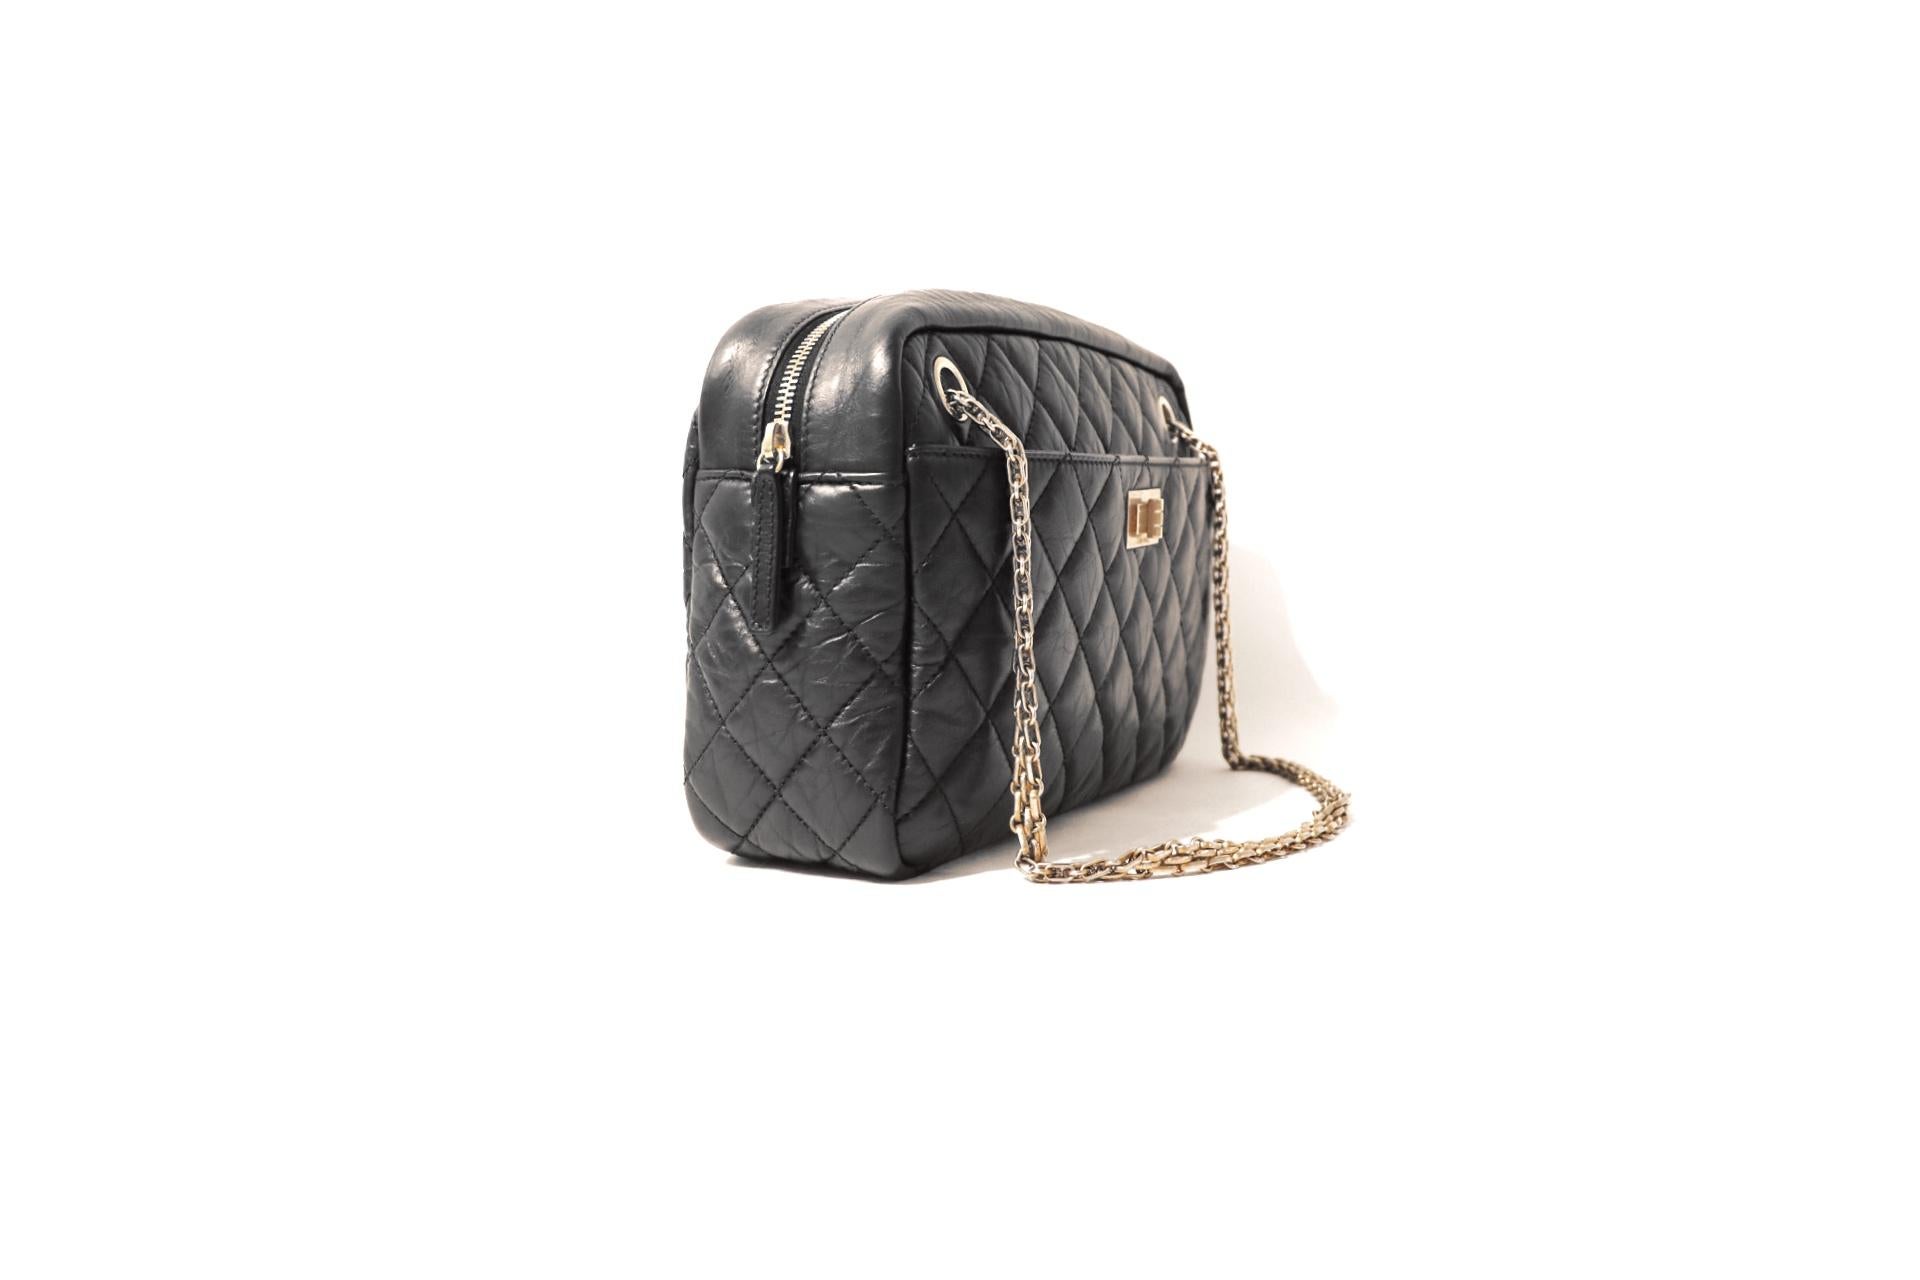 This authentic Chanel Black Aged Calfskin Reissue 2.55 Camera Bag is in excellent condition.  Perfect for daily use, yet easily transitions from day to evening, the Reissue Camera Bag is a great addition to any collection.  
Black aged calfskin is